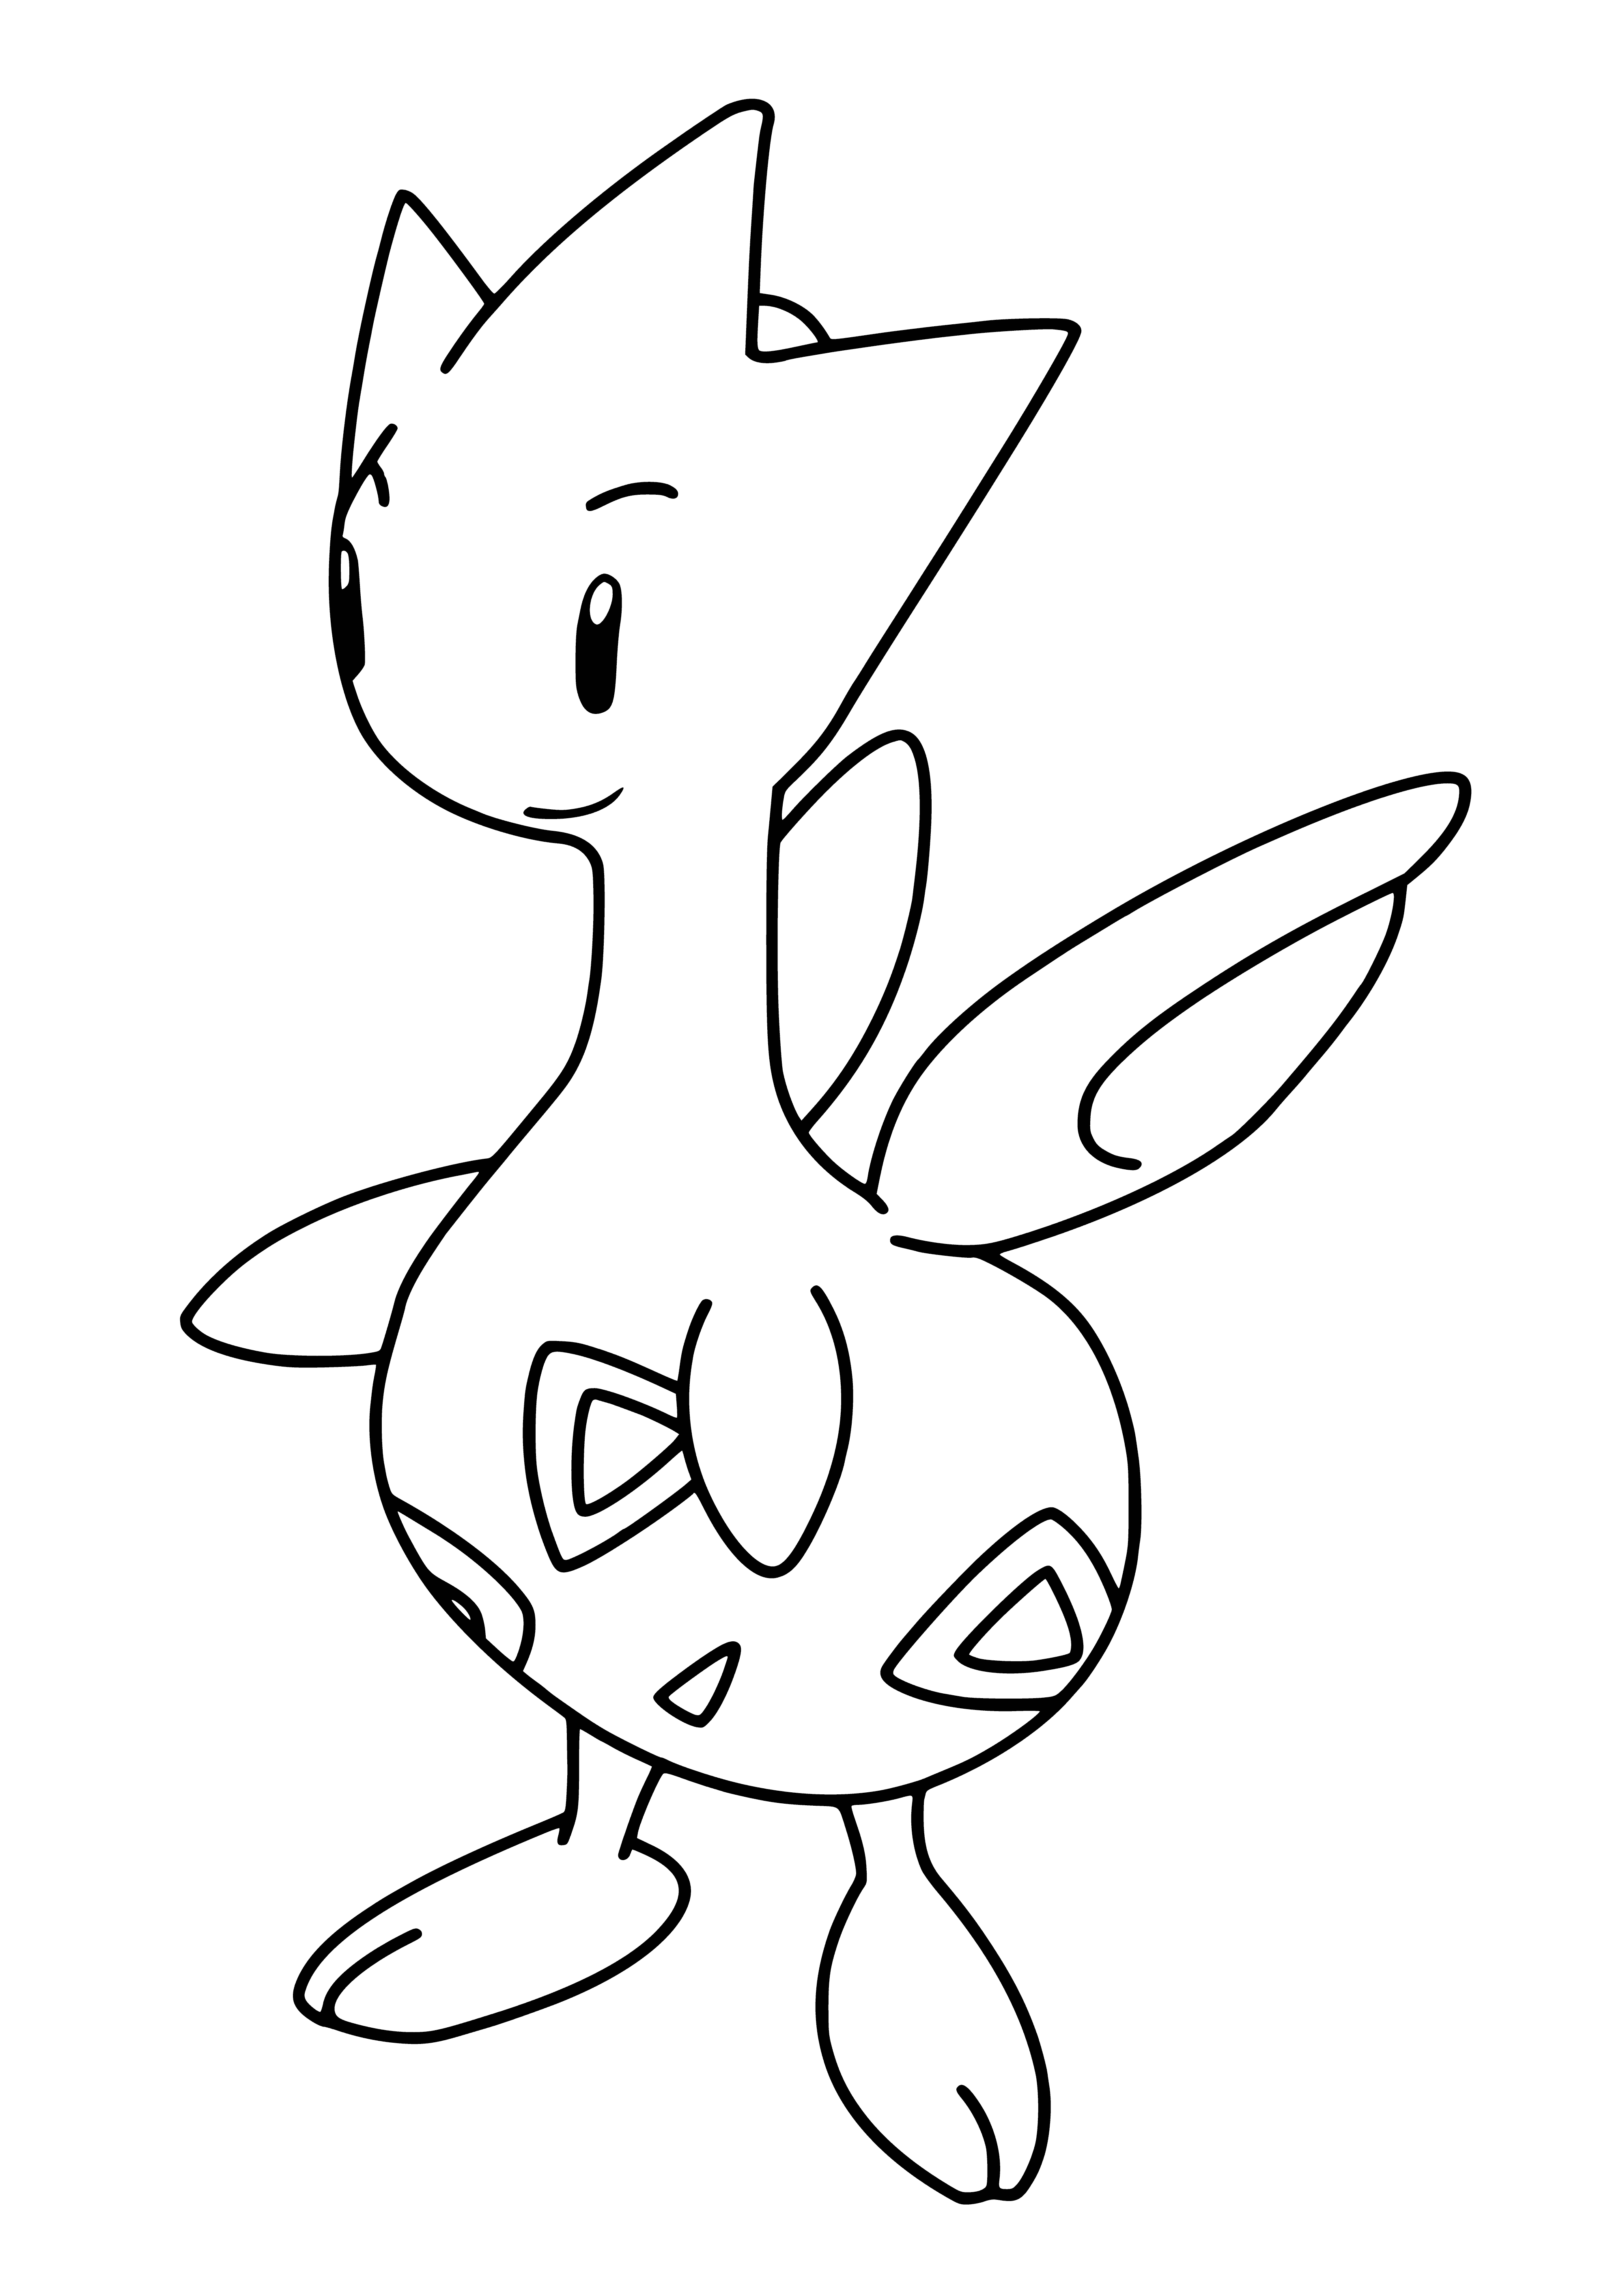 coloring page: Small, white, fairy-like Pokemon with black head, eyes, beak, wings & tail. Red gem on forehead.